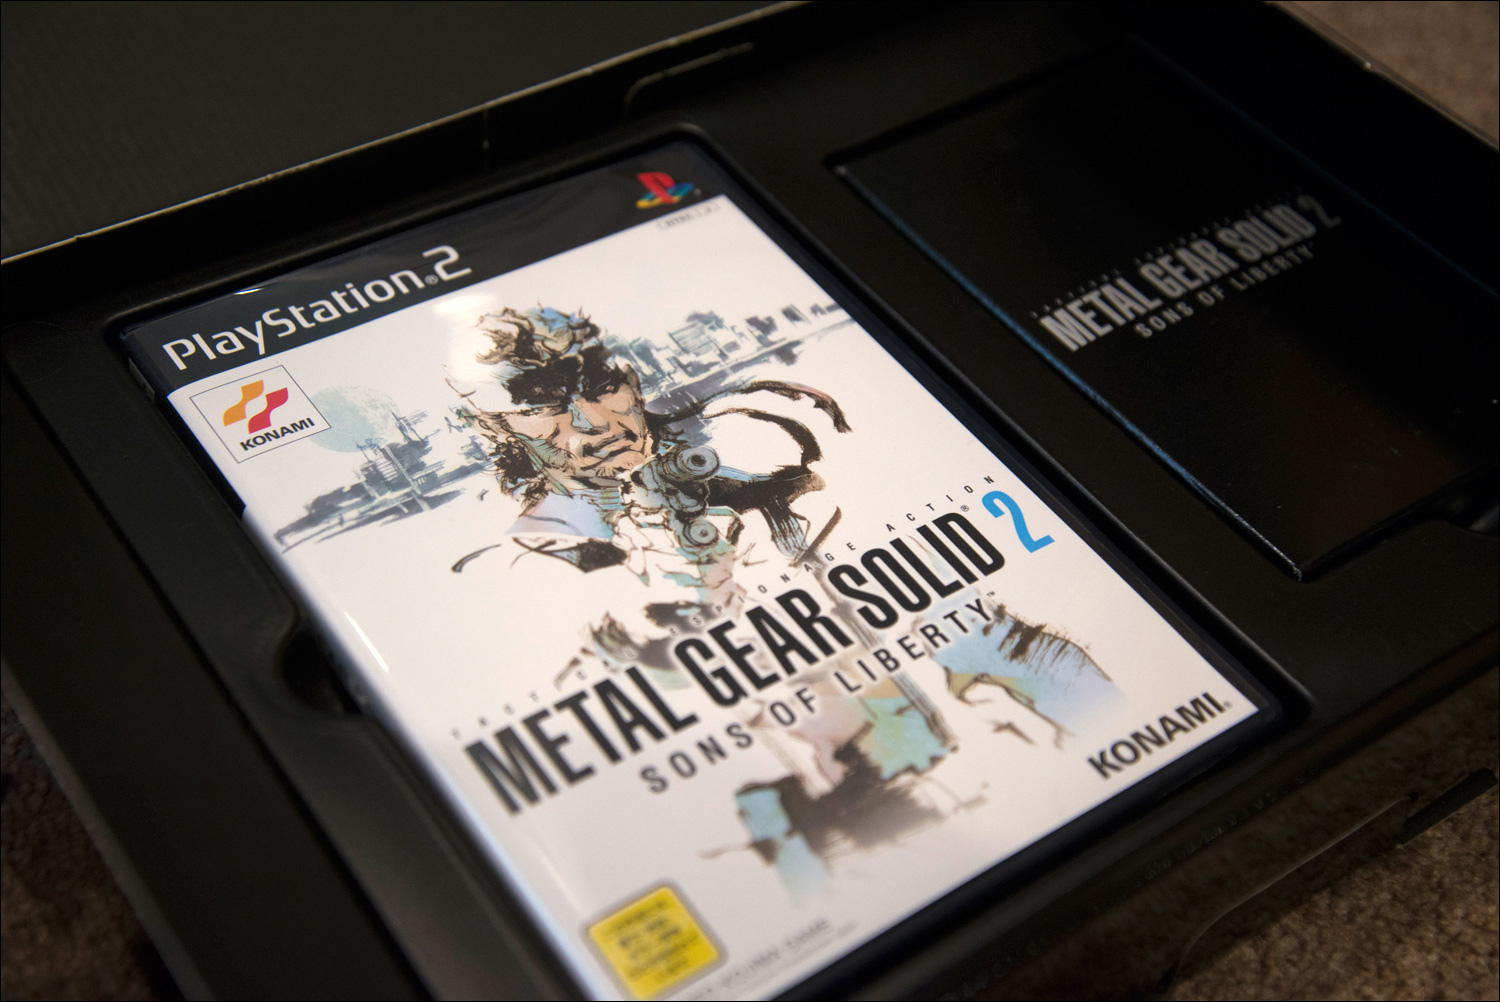 Metal-Gear-Solid-2-Sons-of-Liberty-Premium-Package-Contents